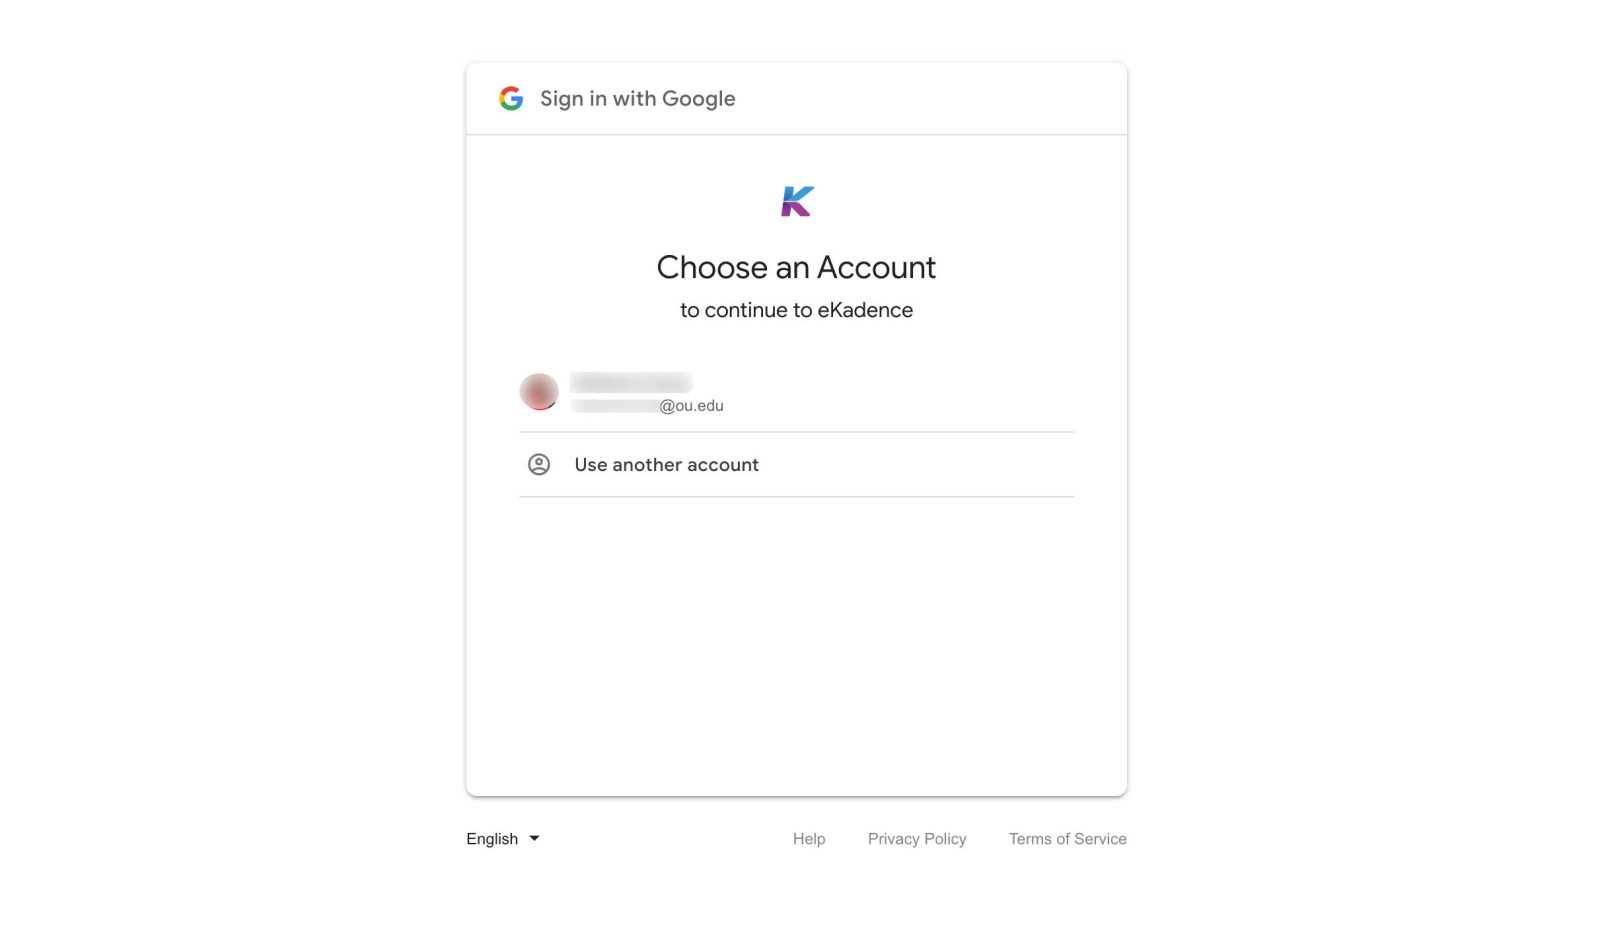 a Google account is selected.